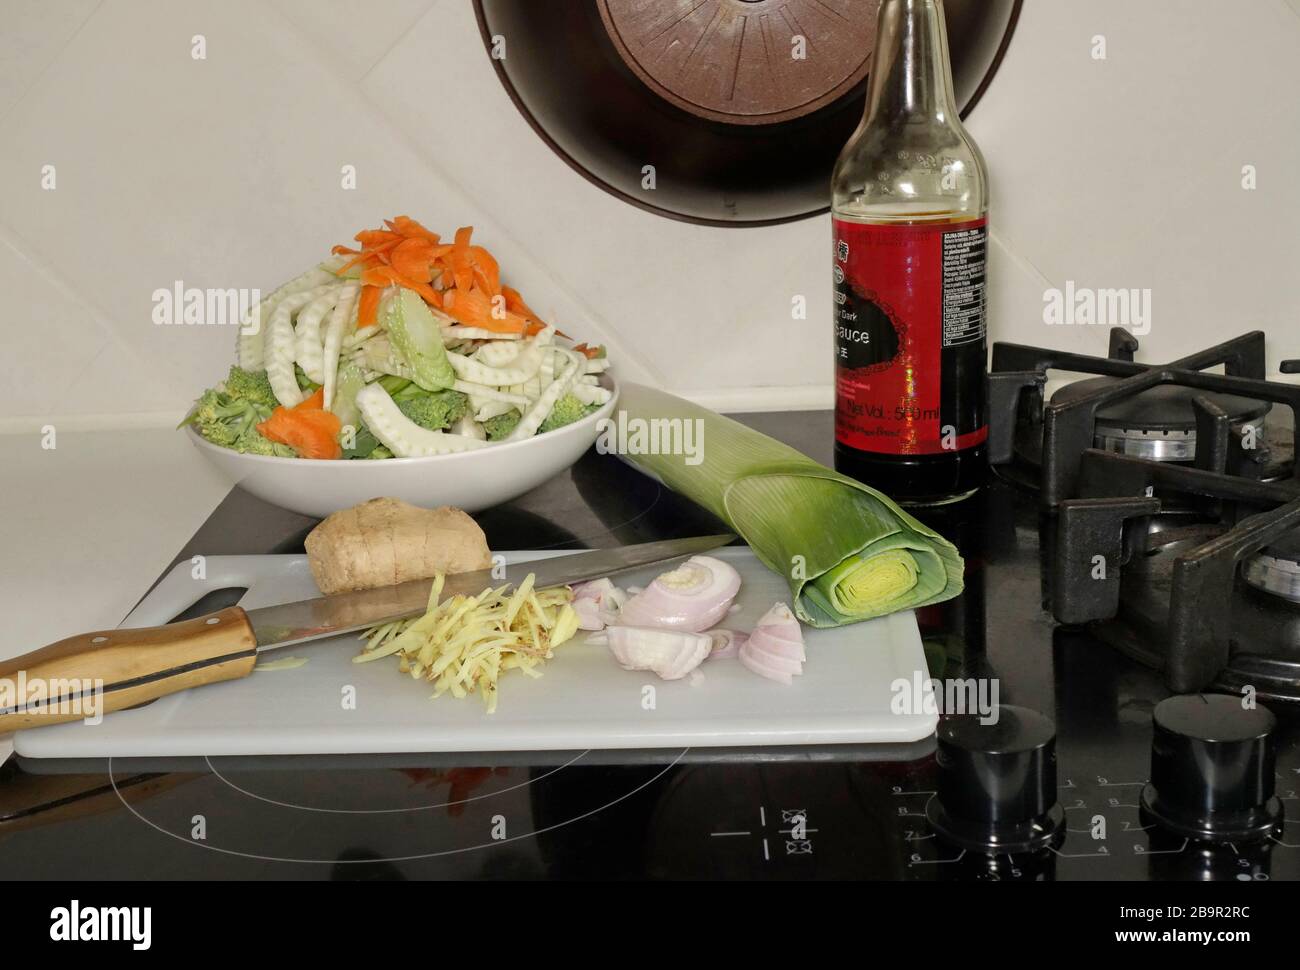 Cut, shredded raw vegetables on a stove in a pantry prepared for simple wok dish. Stock Photo